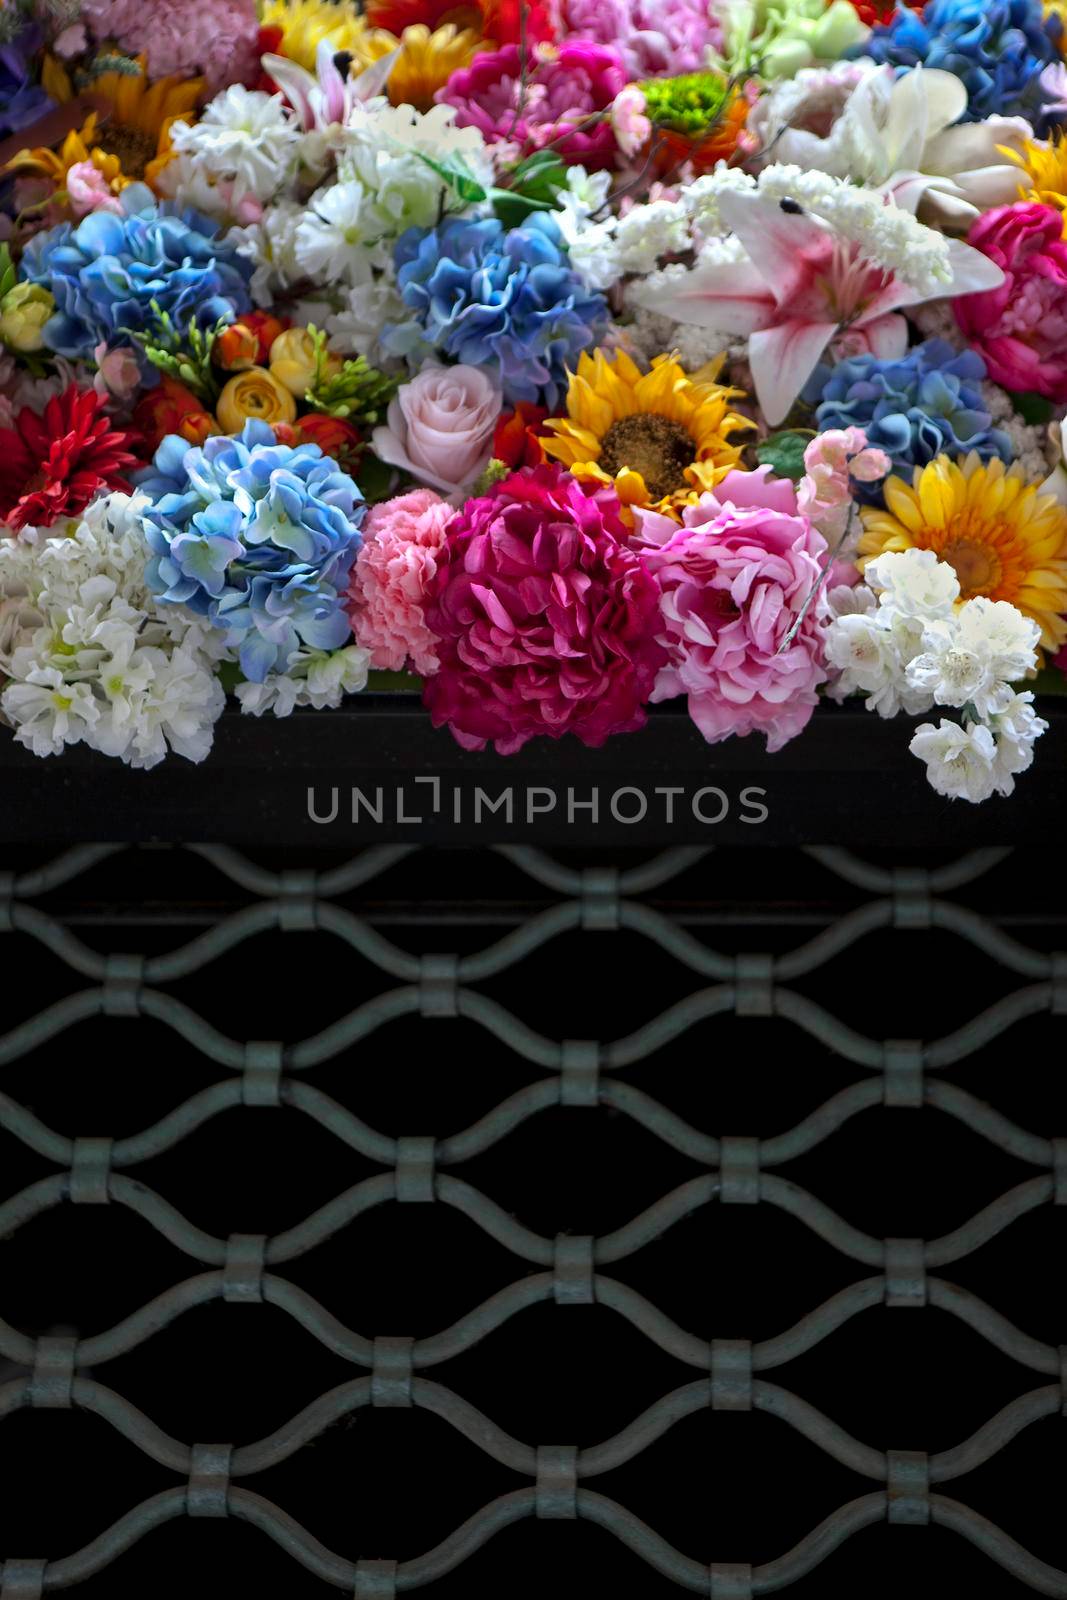 We celebrate bankruptcy with flowers by jacques_palut